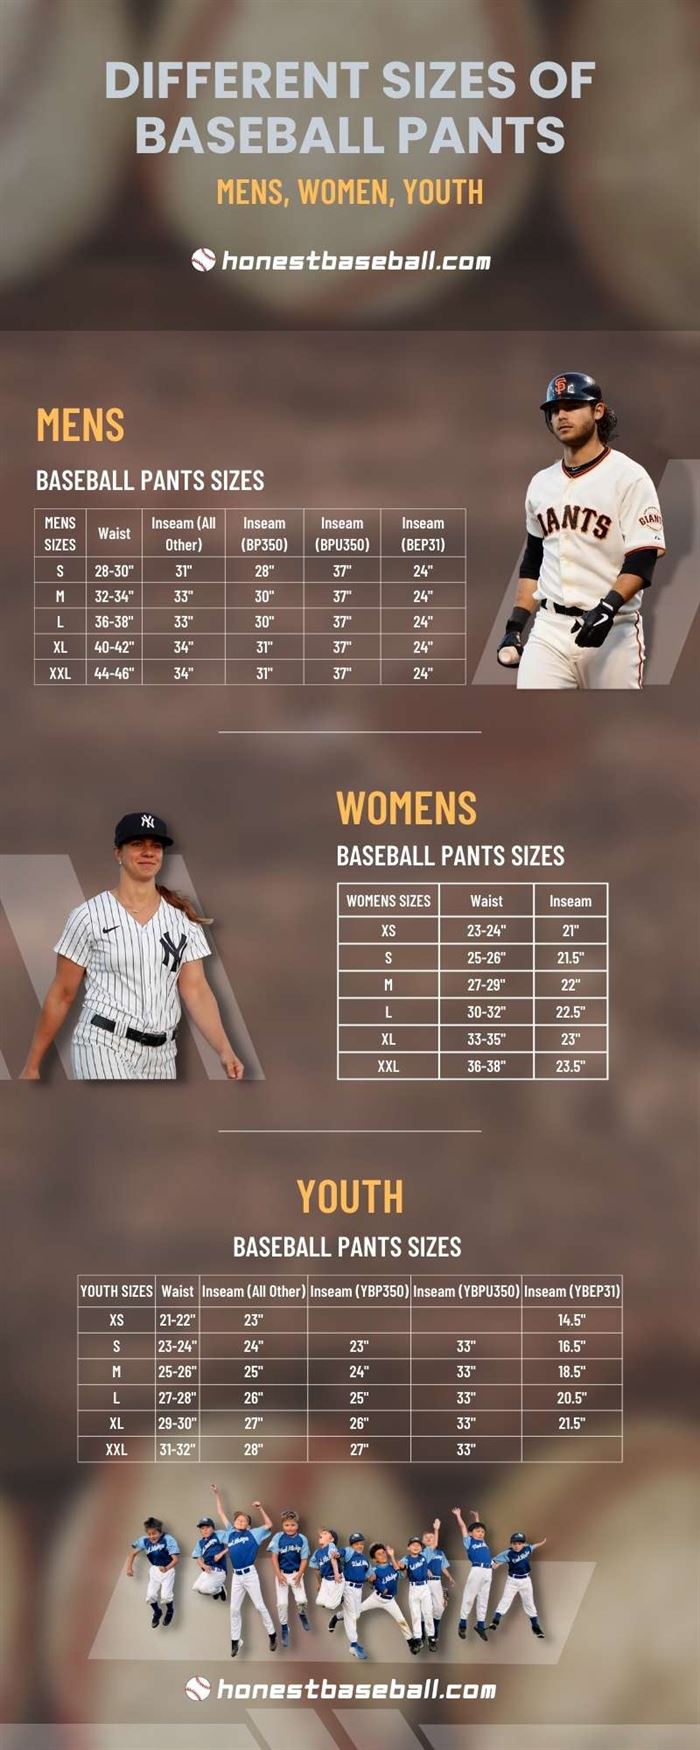 Different Sizes Of Baseball Pants for Men, Women, and Youth